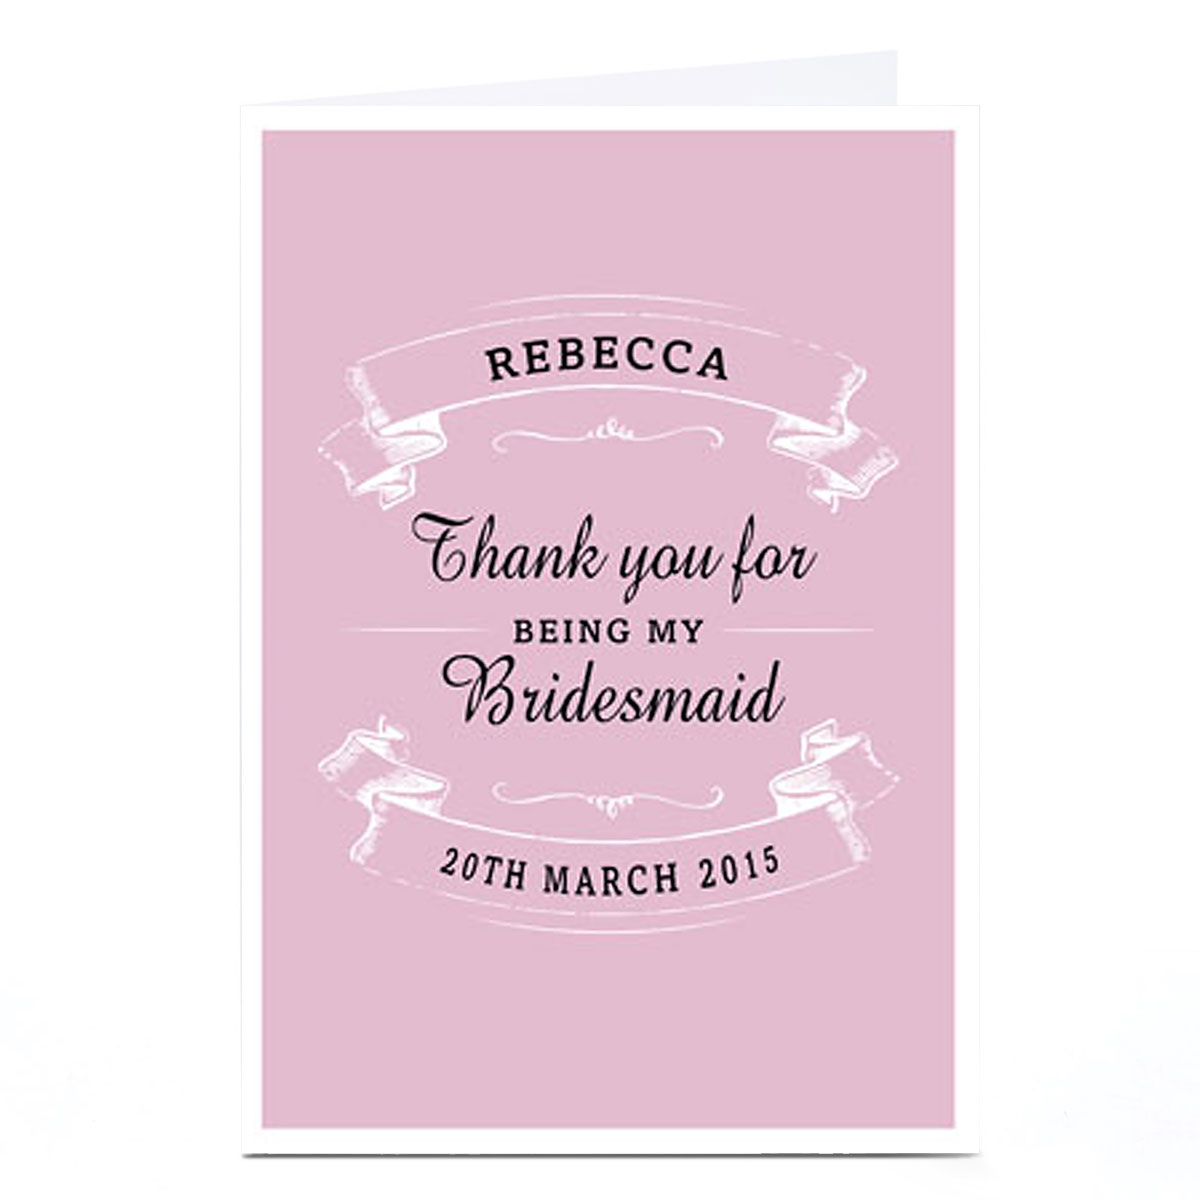 Personalised Thank You Card - For Being My Bridesmaid